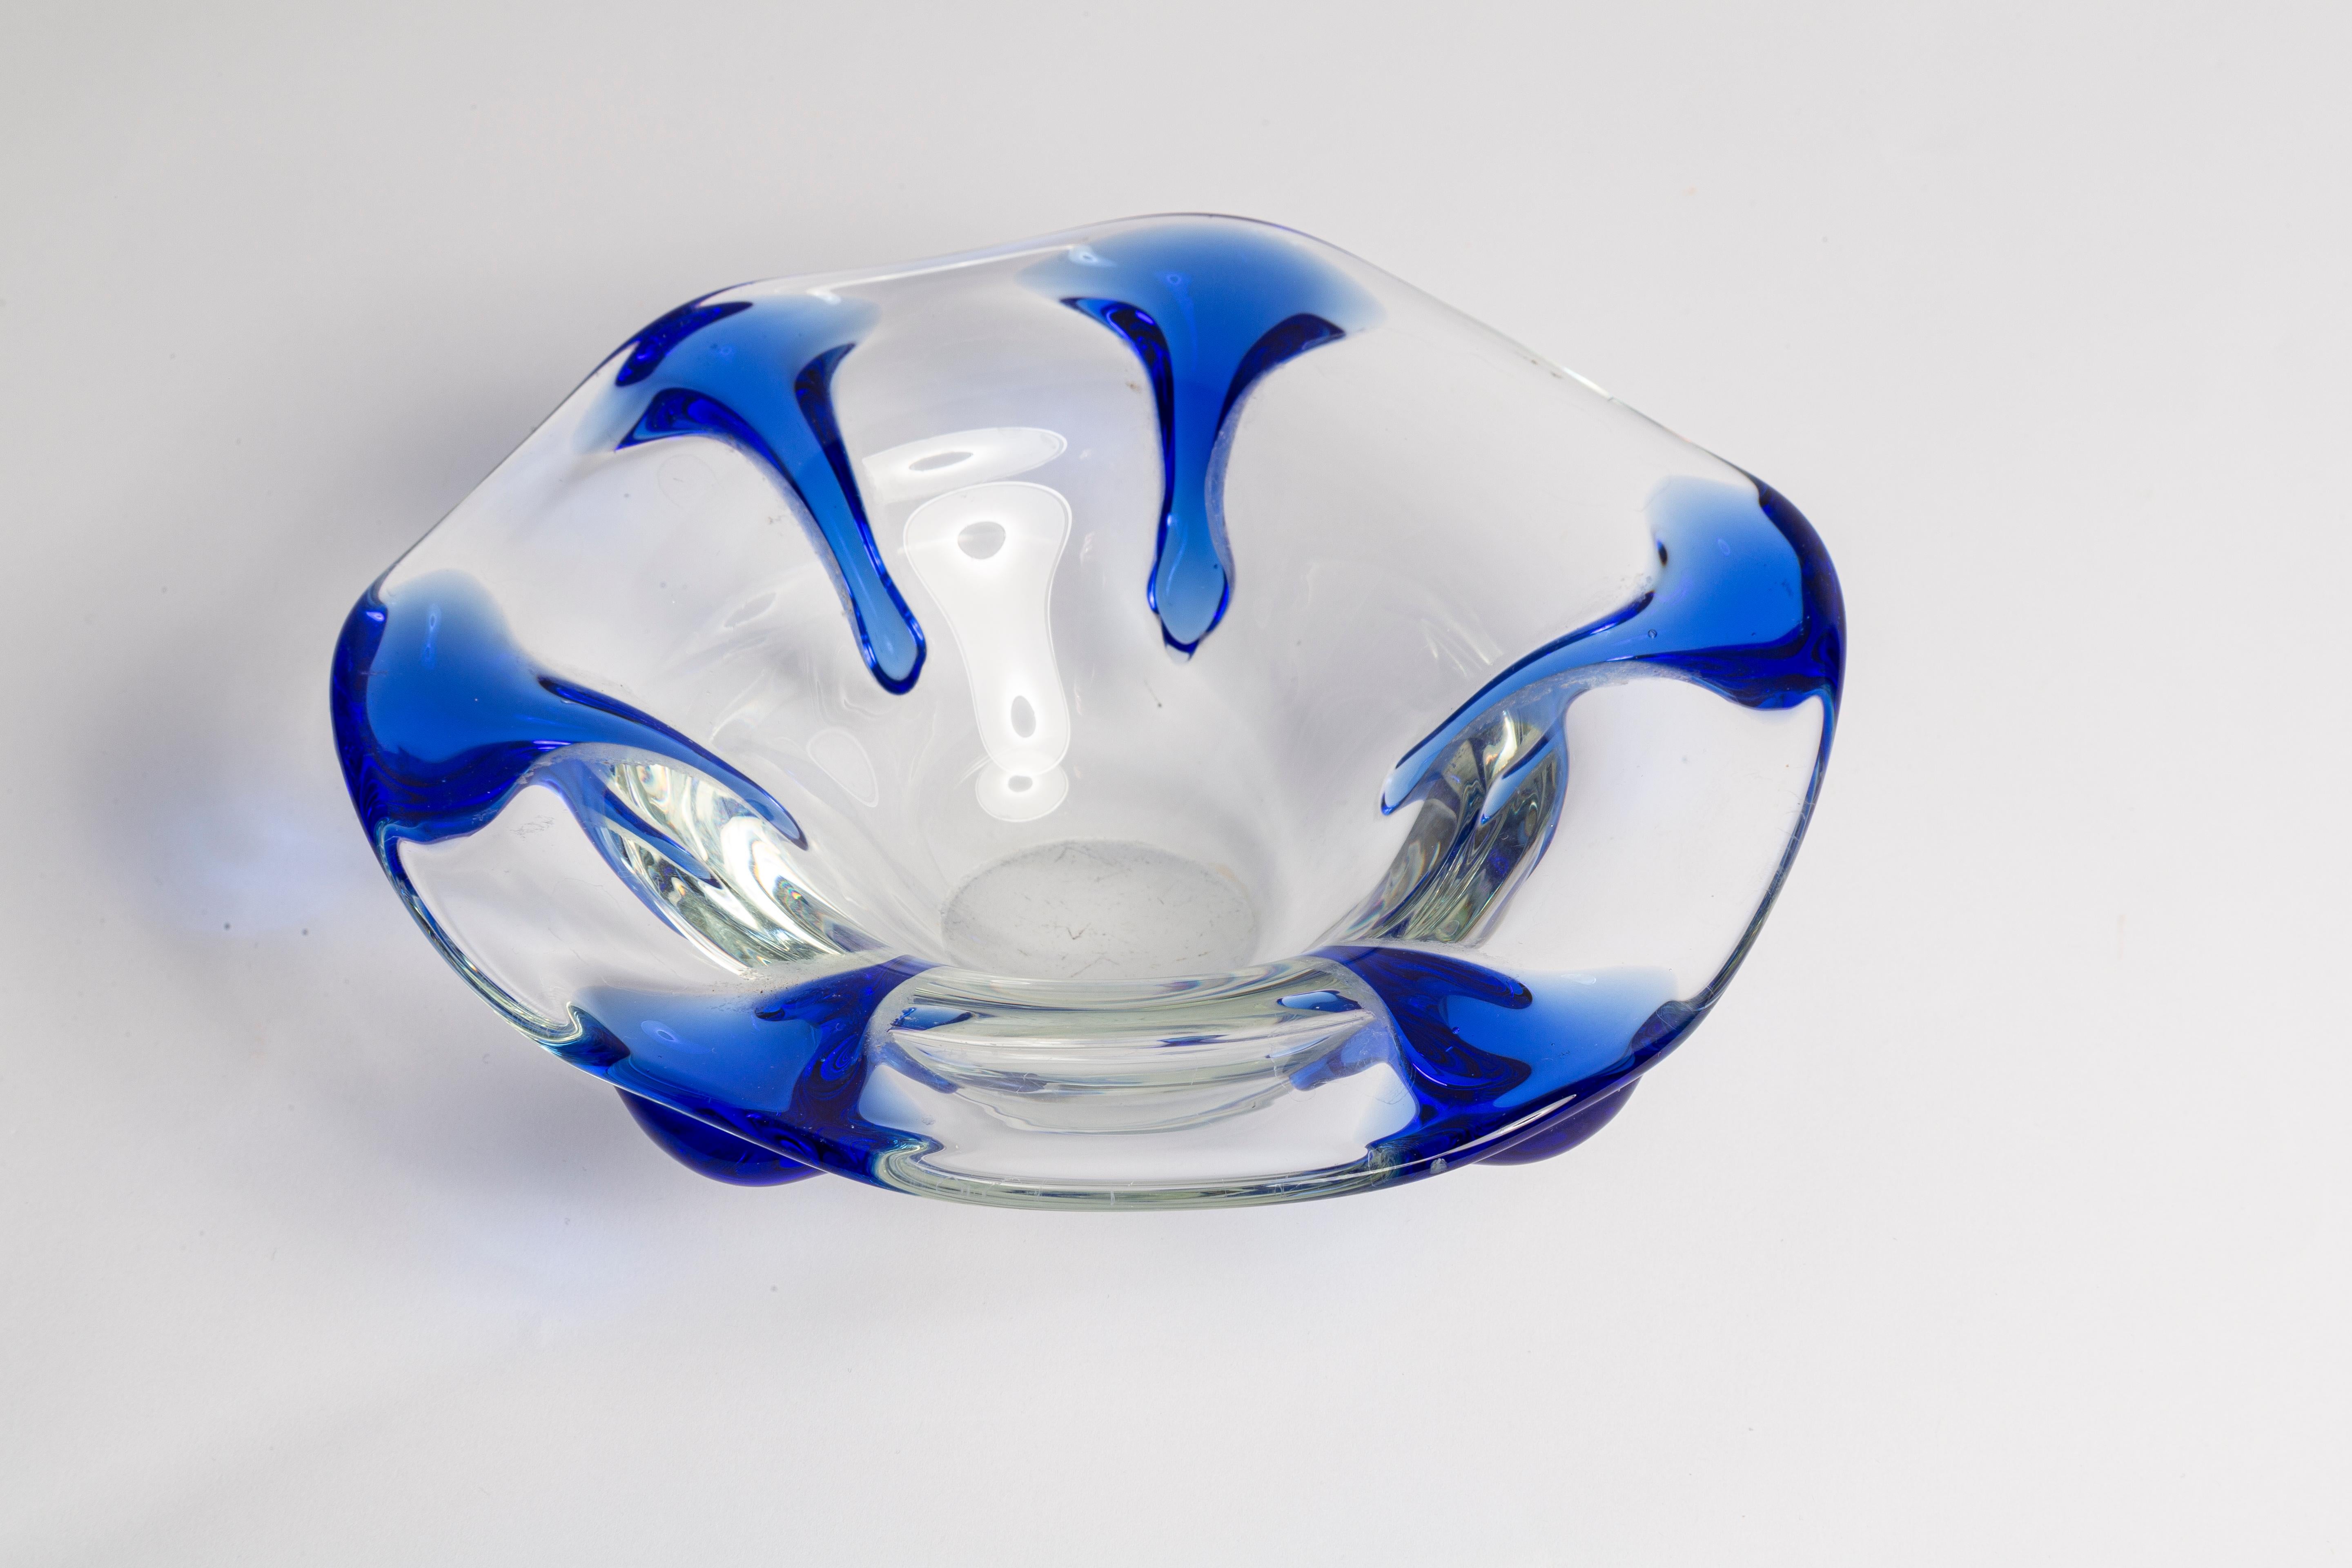 This original vintage glass ash tray bowl element was designed and produced in the 1970s in Poland. It is made in Sommerso Technique and has a fantastic faceted form. The vibrant color makes this items highly decorative. This item is a high quality